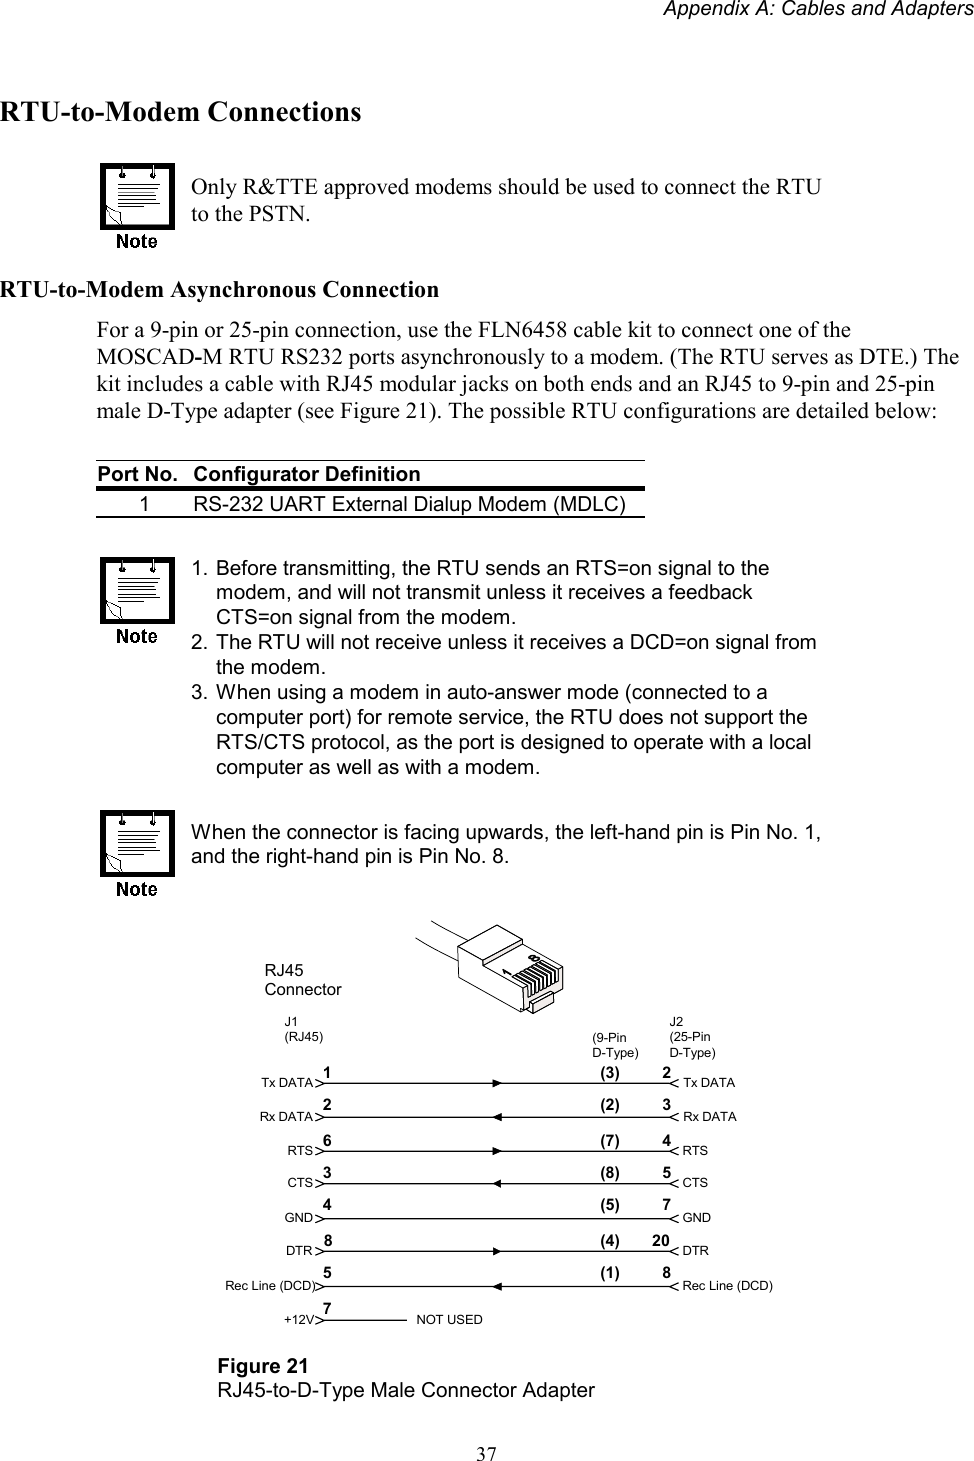 Appendix A: Cables and Adapters37RTU-to-Modem ConnectionsOnly R&amp;TTE approved modems should be used to connect the RTUto the PSTN.RTU-to-Modem Asynchronous ConnectionFor a 9-pin or 25-pin connection, use the FLN6458 cable kit to connect one of theMOSCAD-M RTU RS232 ports asynchronously to a modem. (The RTU serves as DTE.) Thekit includes a cable with RJ45 modular jacks on both ends and an RJ45 to 9-pin and 25-pinmale D-Type adapter (see Figure 21). The possible RTU configurations are detailed below:Port No. Configurator Definition1 RS-232 UART External Dialup Modem (MDLC)1. Before transmitting, the RTU sends an RTS=on signal to themodem, and will not transmit unless it receives a feedbackCTS=on signal from the modem.2. The RTU will not receive unless it receives a DCD=on signal fromthe modem.3. When using a modem in auto-answer mode (connected to acomputer port) for remote service, the RTU does not support theRTS/CTS protocol, as the port is designed to operate with a localcomputer as well as with a modem.When the connector is facing upwards, the left-hand pin is Pin No. 1,and the right-hand pin is Pin No. 8.Tx DATARx DATARTSCTSGNDDTRTx DATARx DATARTSCTSGNDDTRRec Line (DCD)12Rec Line (DCD)236435J1(RJ45)J2(25-PinD-Type)47820587(9-PinD-Type)(3)(2)(7)(8)(5)(4)(1)+12V NOT USEDFigure 21RJ45-to-D-Type Male Connector AdapterRJ45Connector